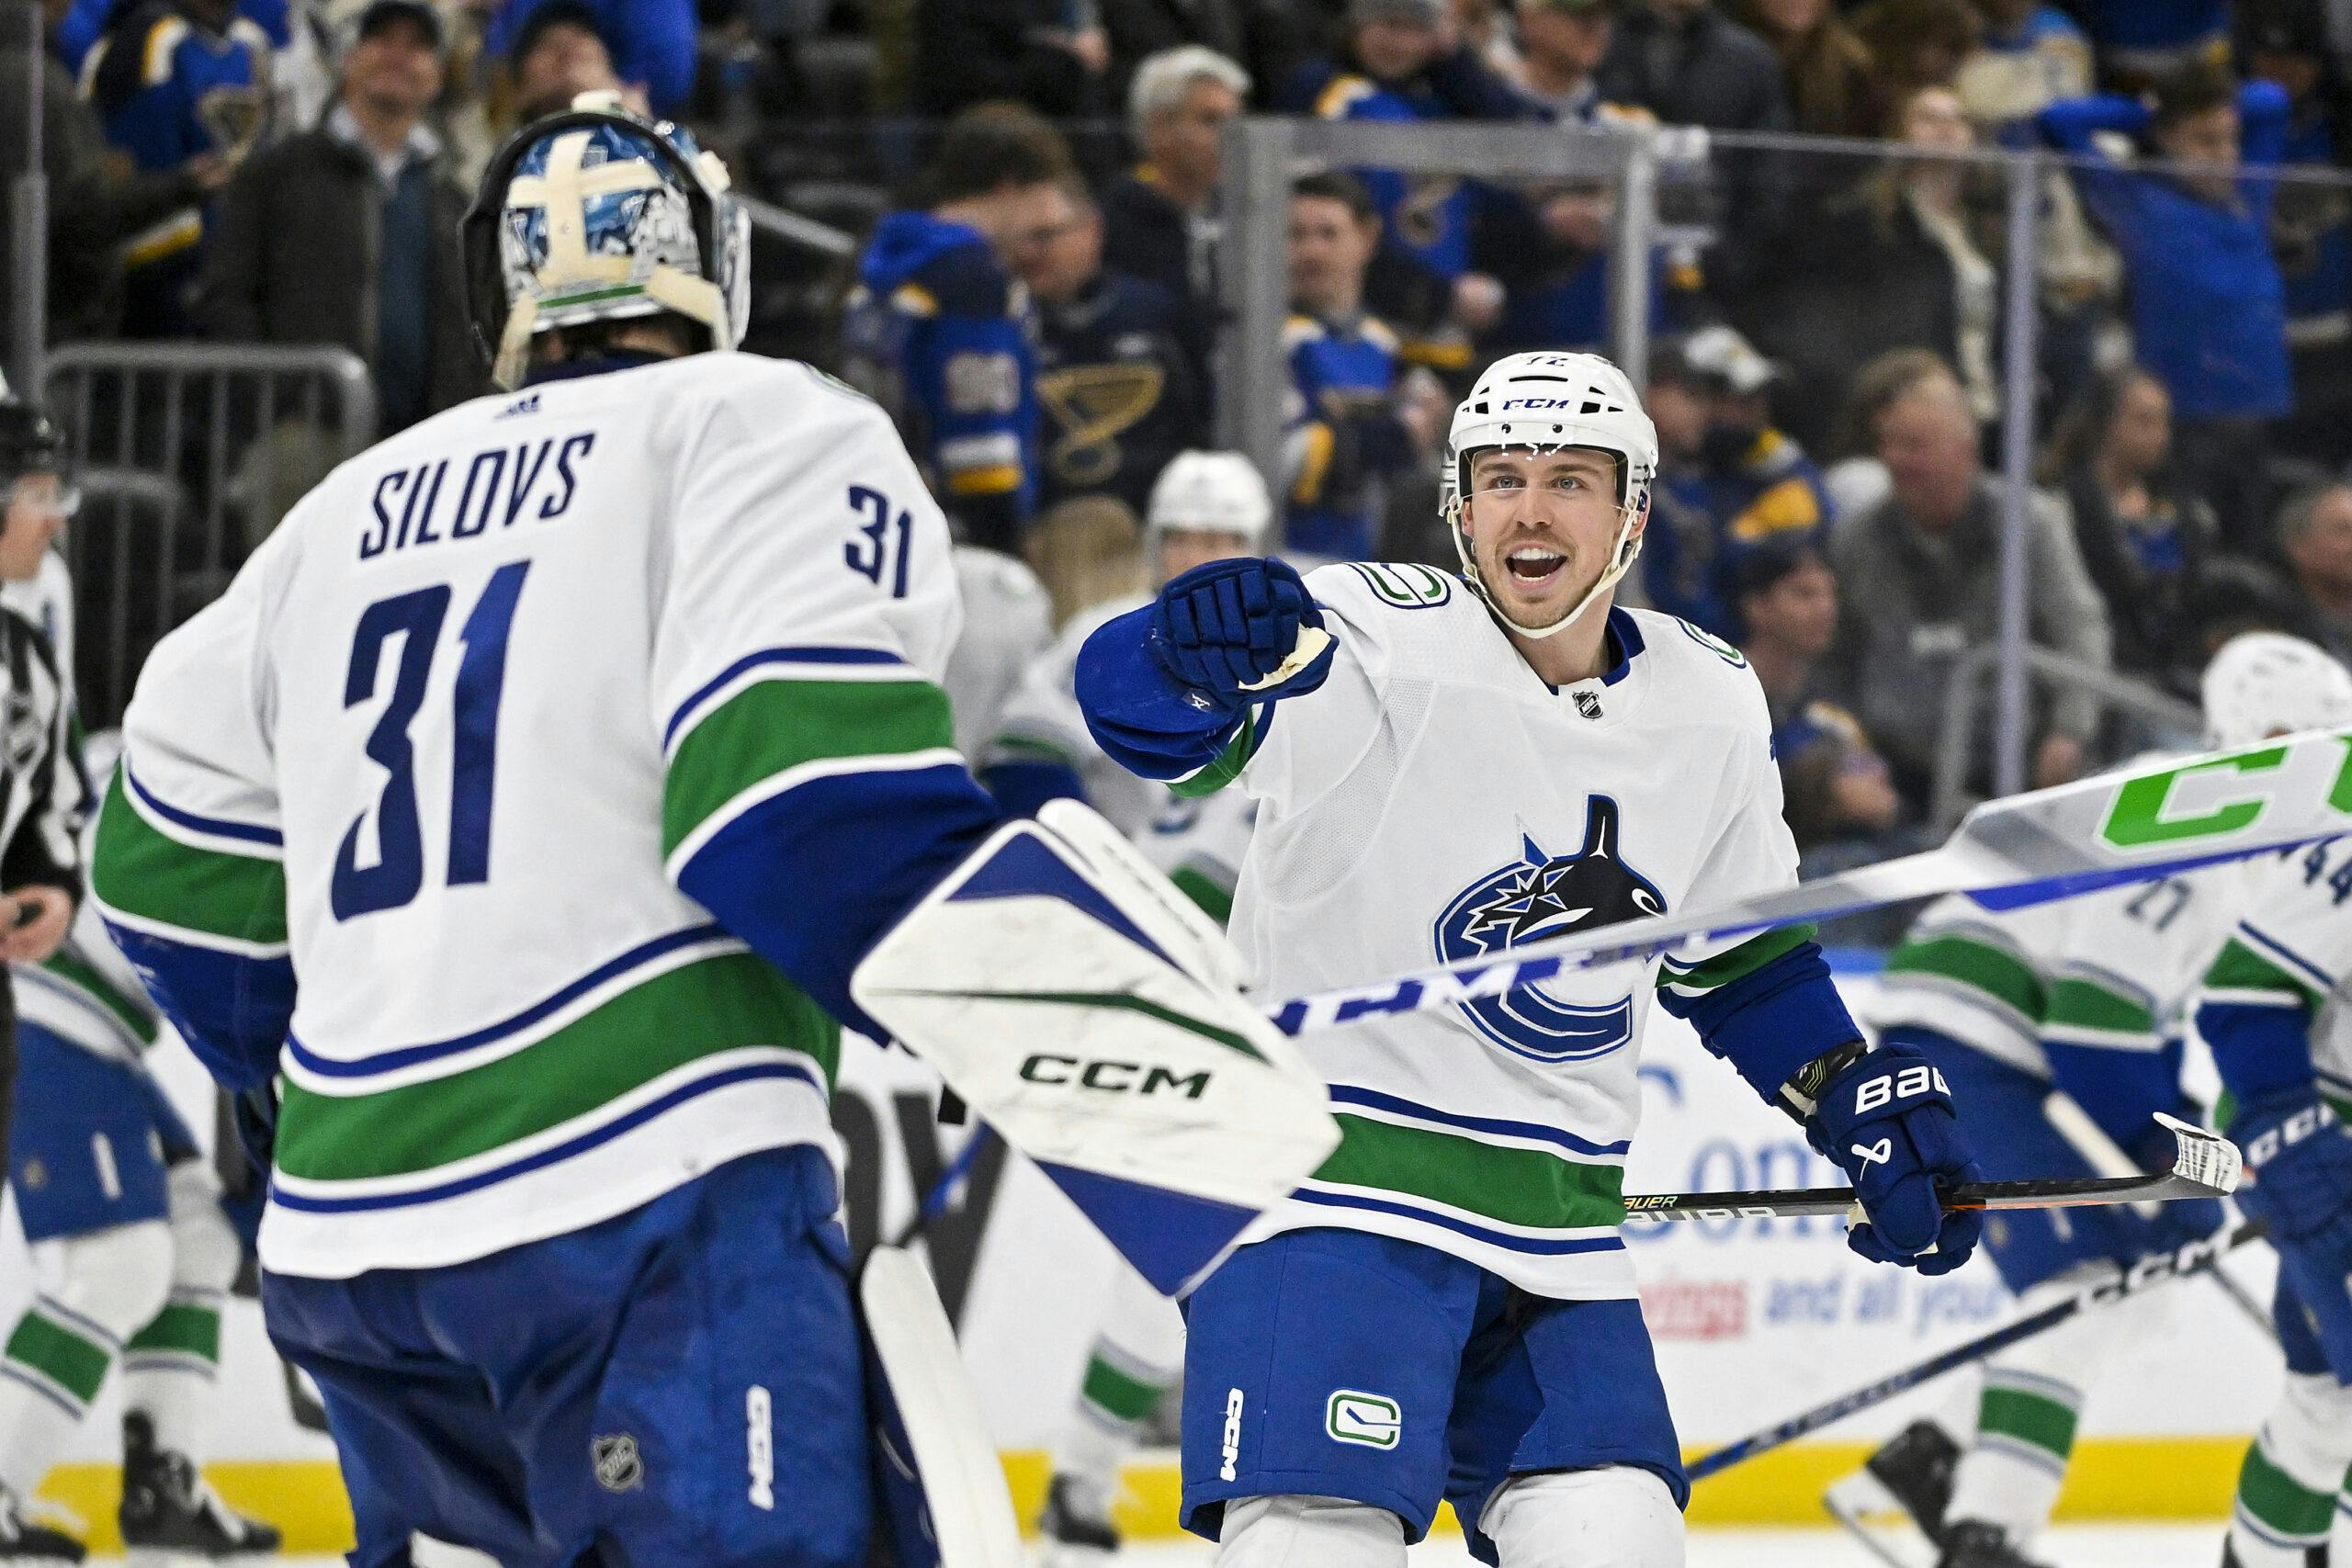 Vancouver Canucks: The Inception of the Boston Model